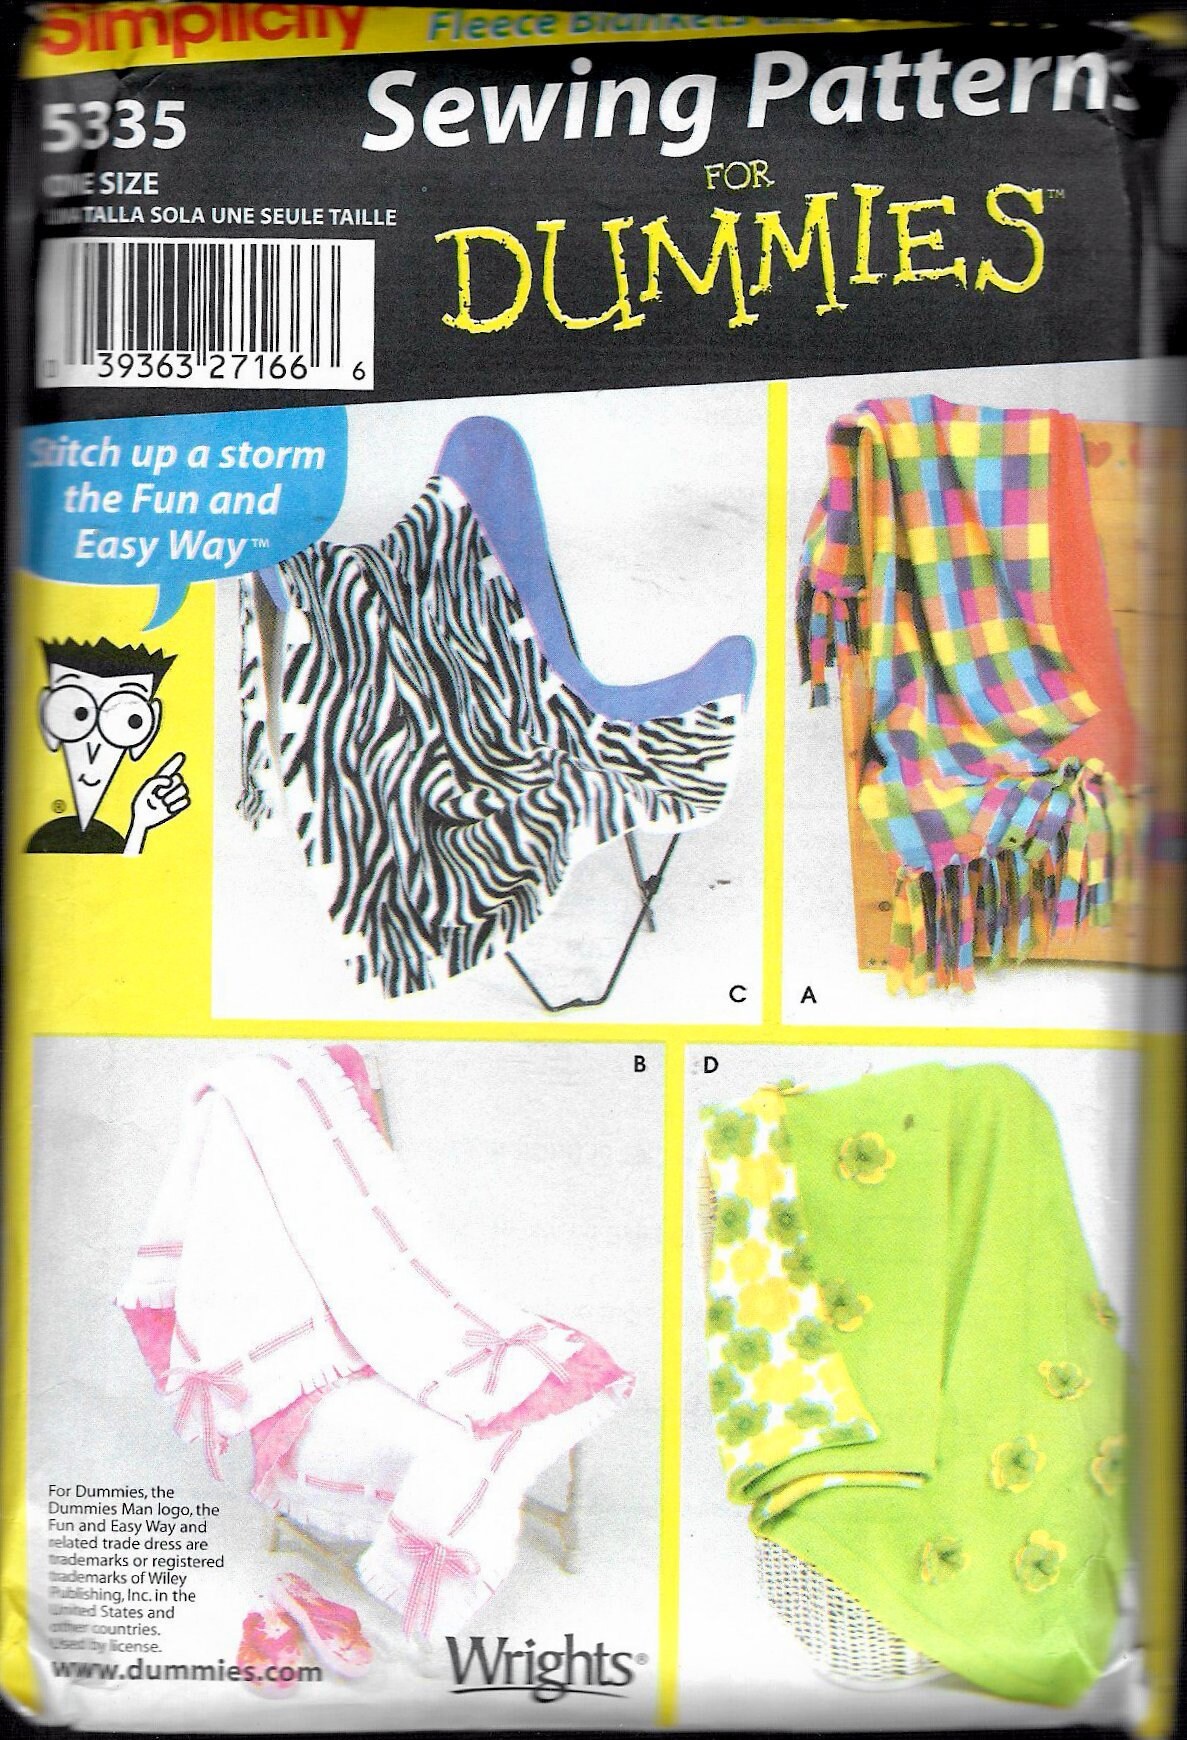 Simplicity Sewing For Dummies Pattern 4745 Fleece Pillow in a